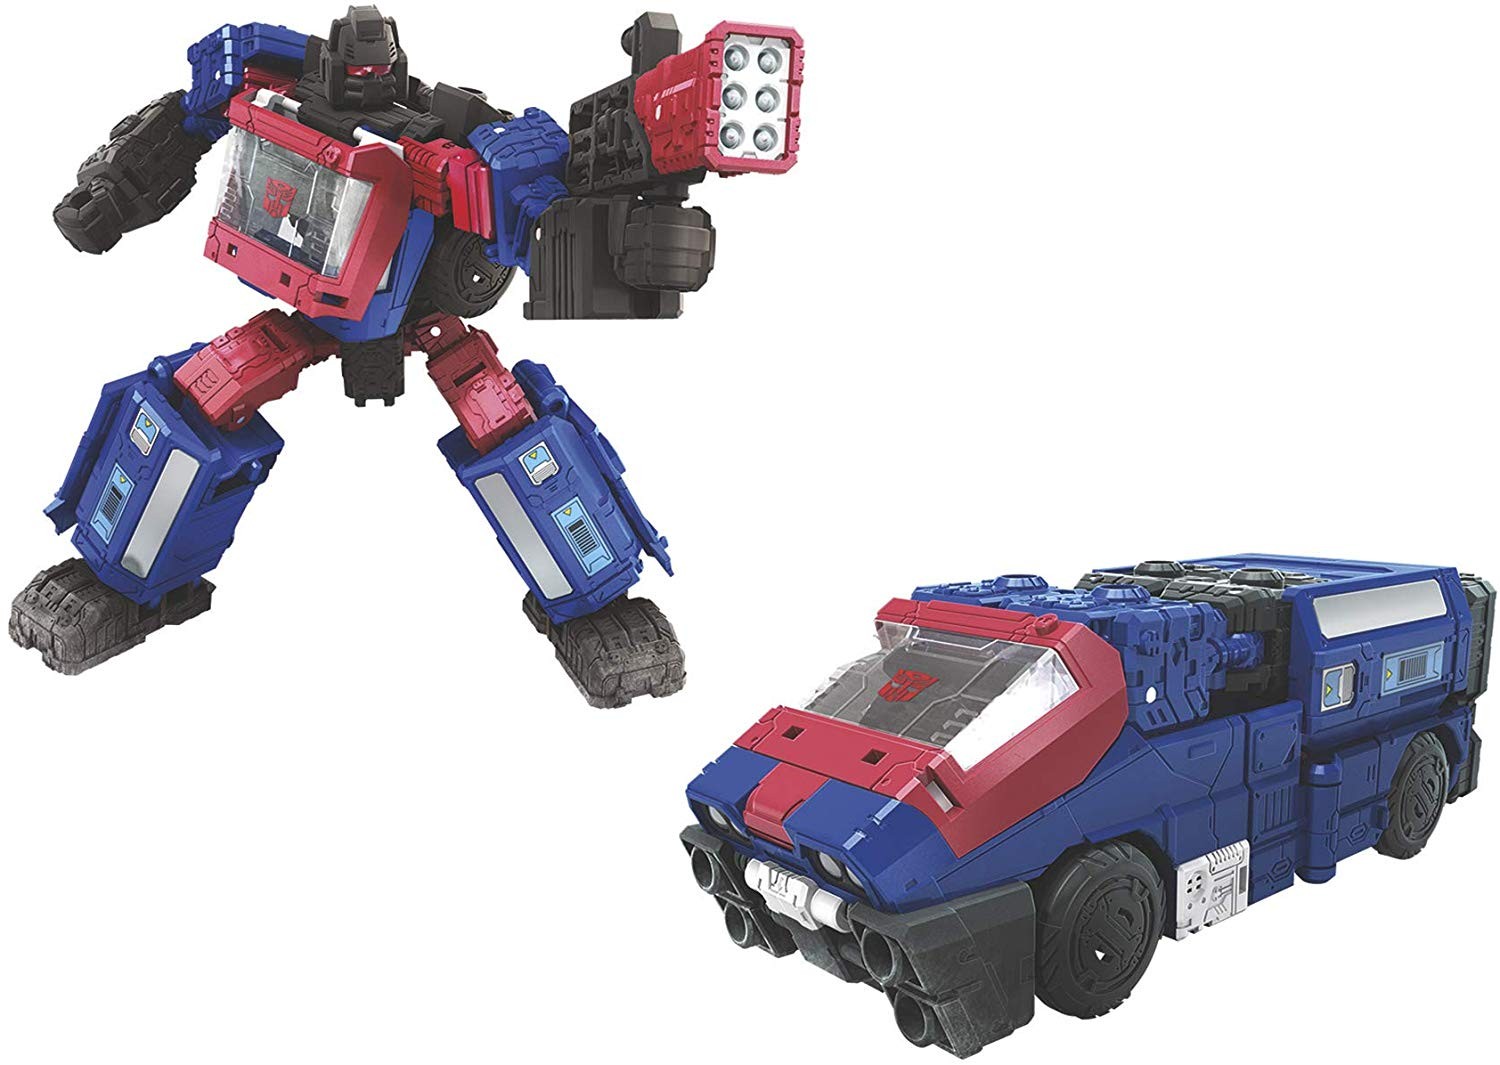 Transformers News: Transformers War for Cybertron: Siege Spinister and Crosshairs Up For Pre-Order at Amazon, Crosshair